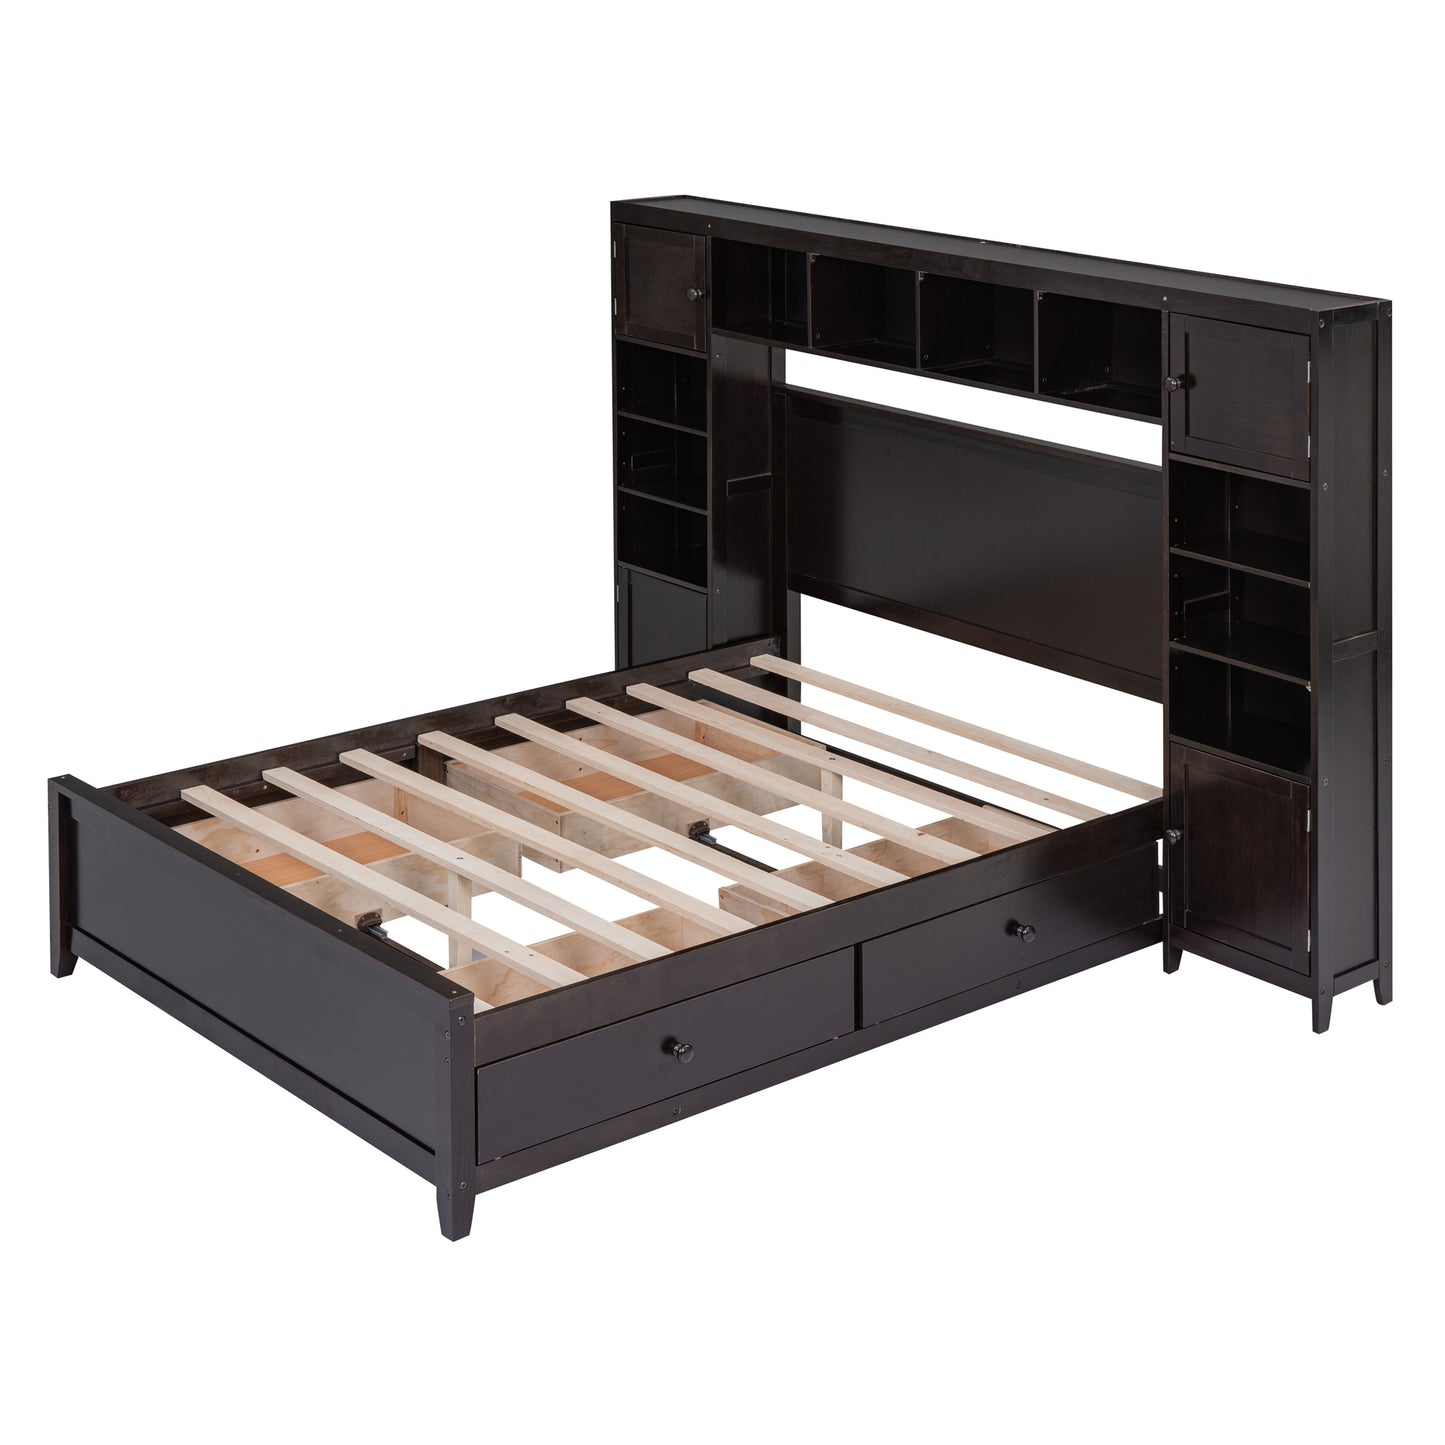 Full Size Wooden Platform Bed With All-in-One Cabinet and Shelf, Espresso